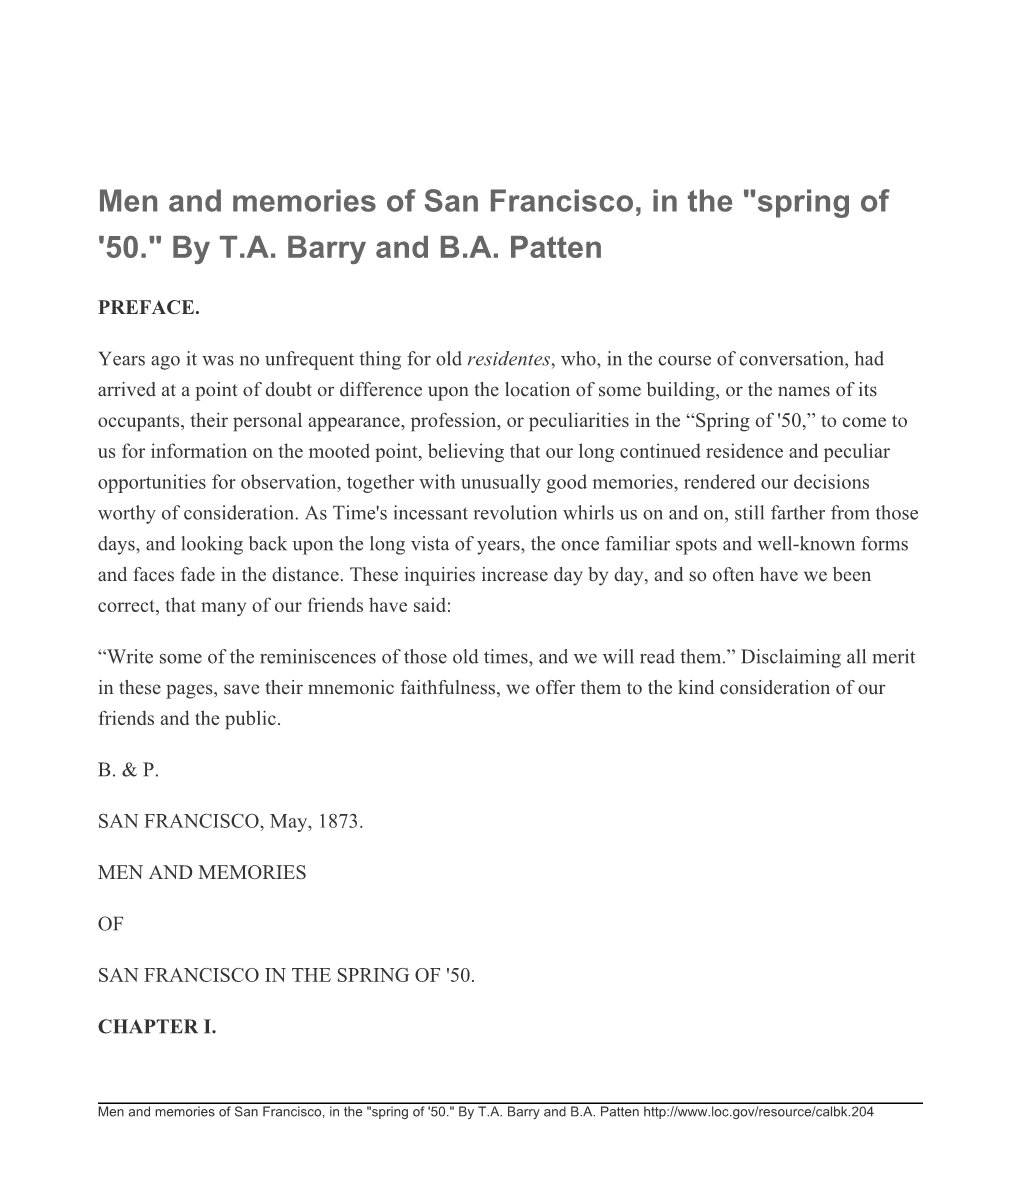 Men and Memories of San Francisco, in the "Spring of '50." by T.A. Barry and B.A